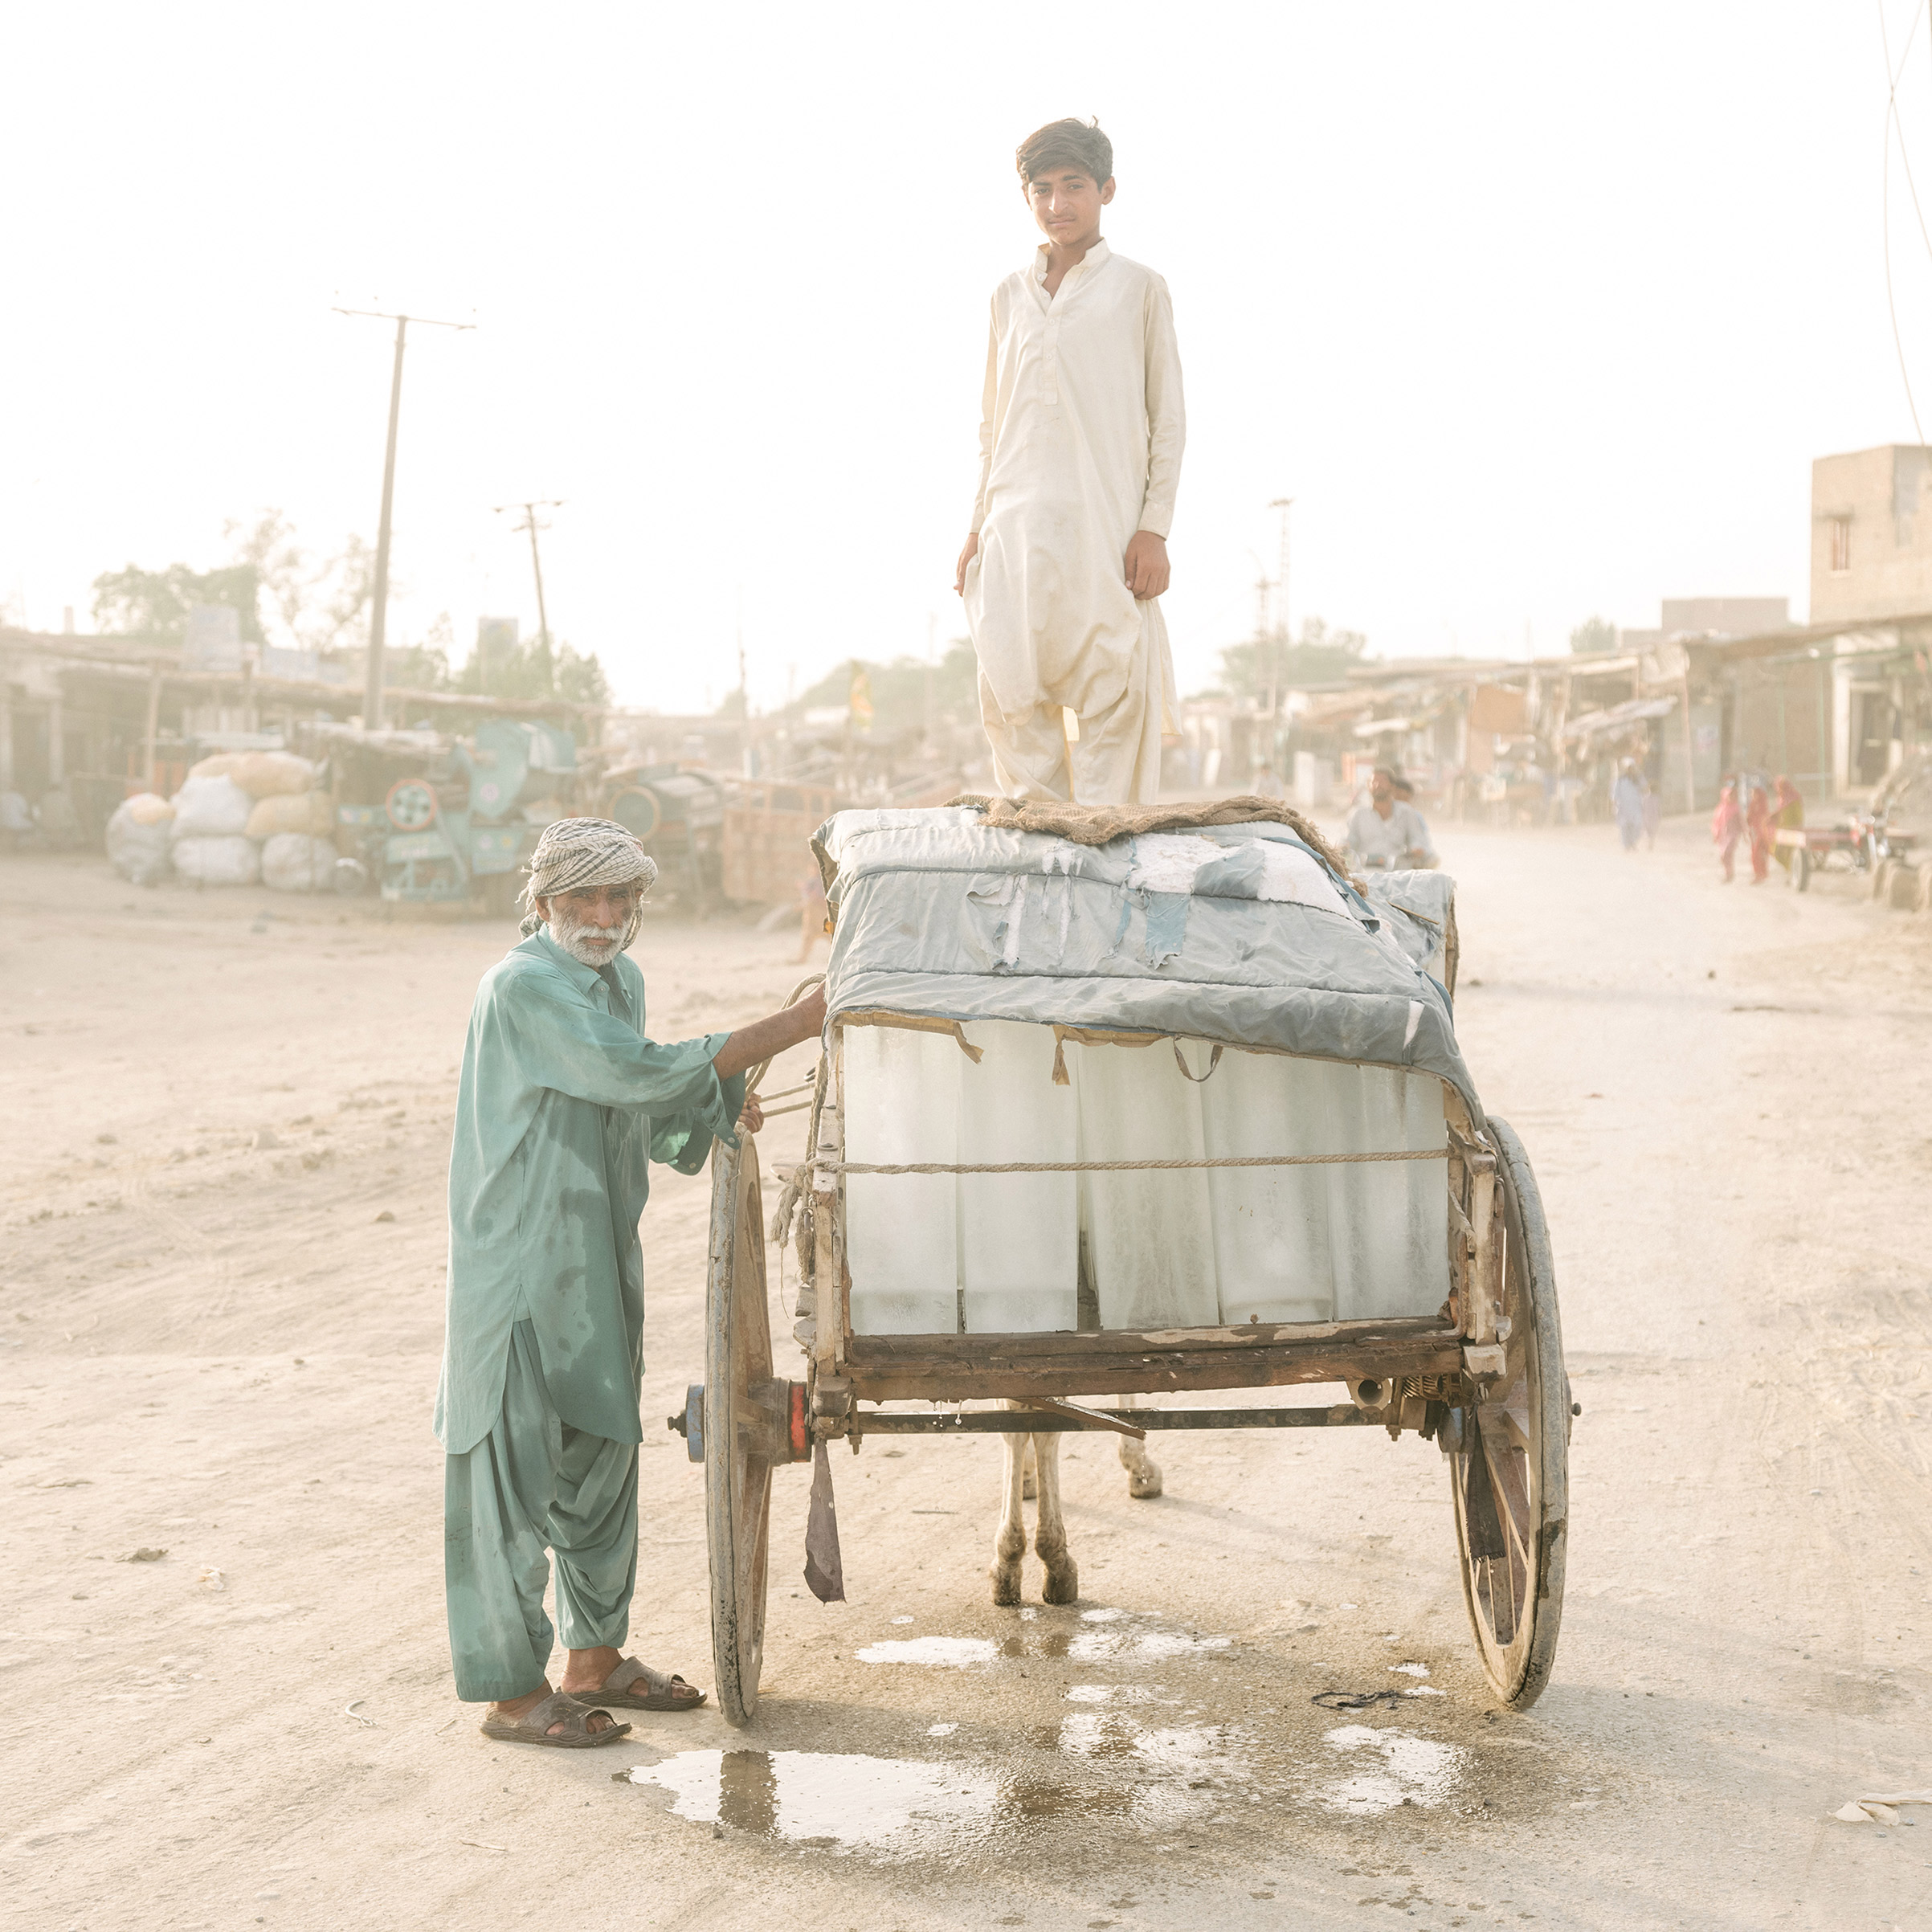 Ice sellers in Pakistan. "The Hottest City on Earth," Sept. 23 issue. (Matthieu Paley for TIME)